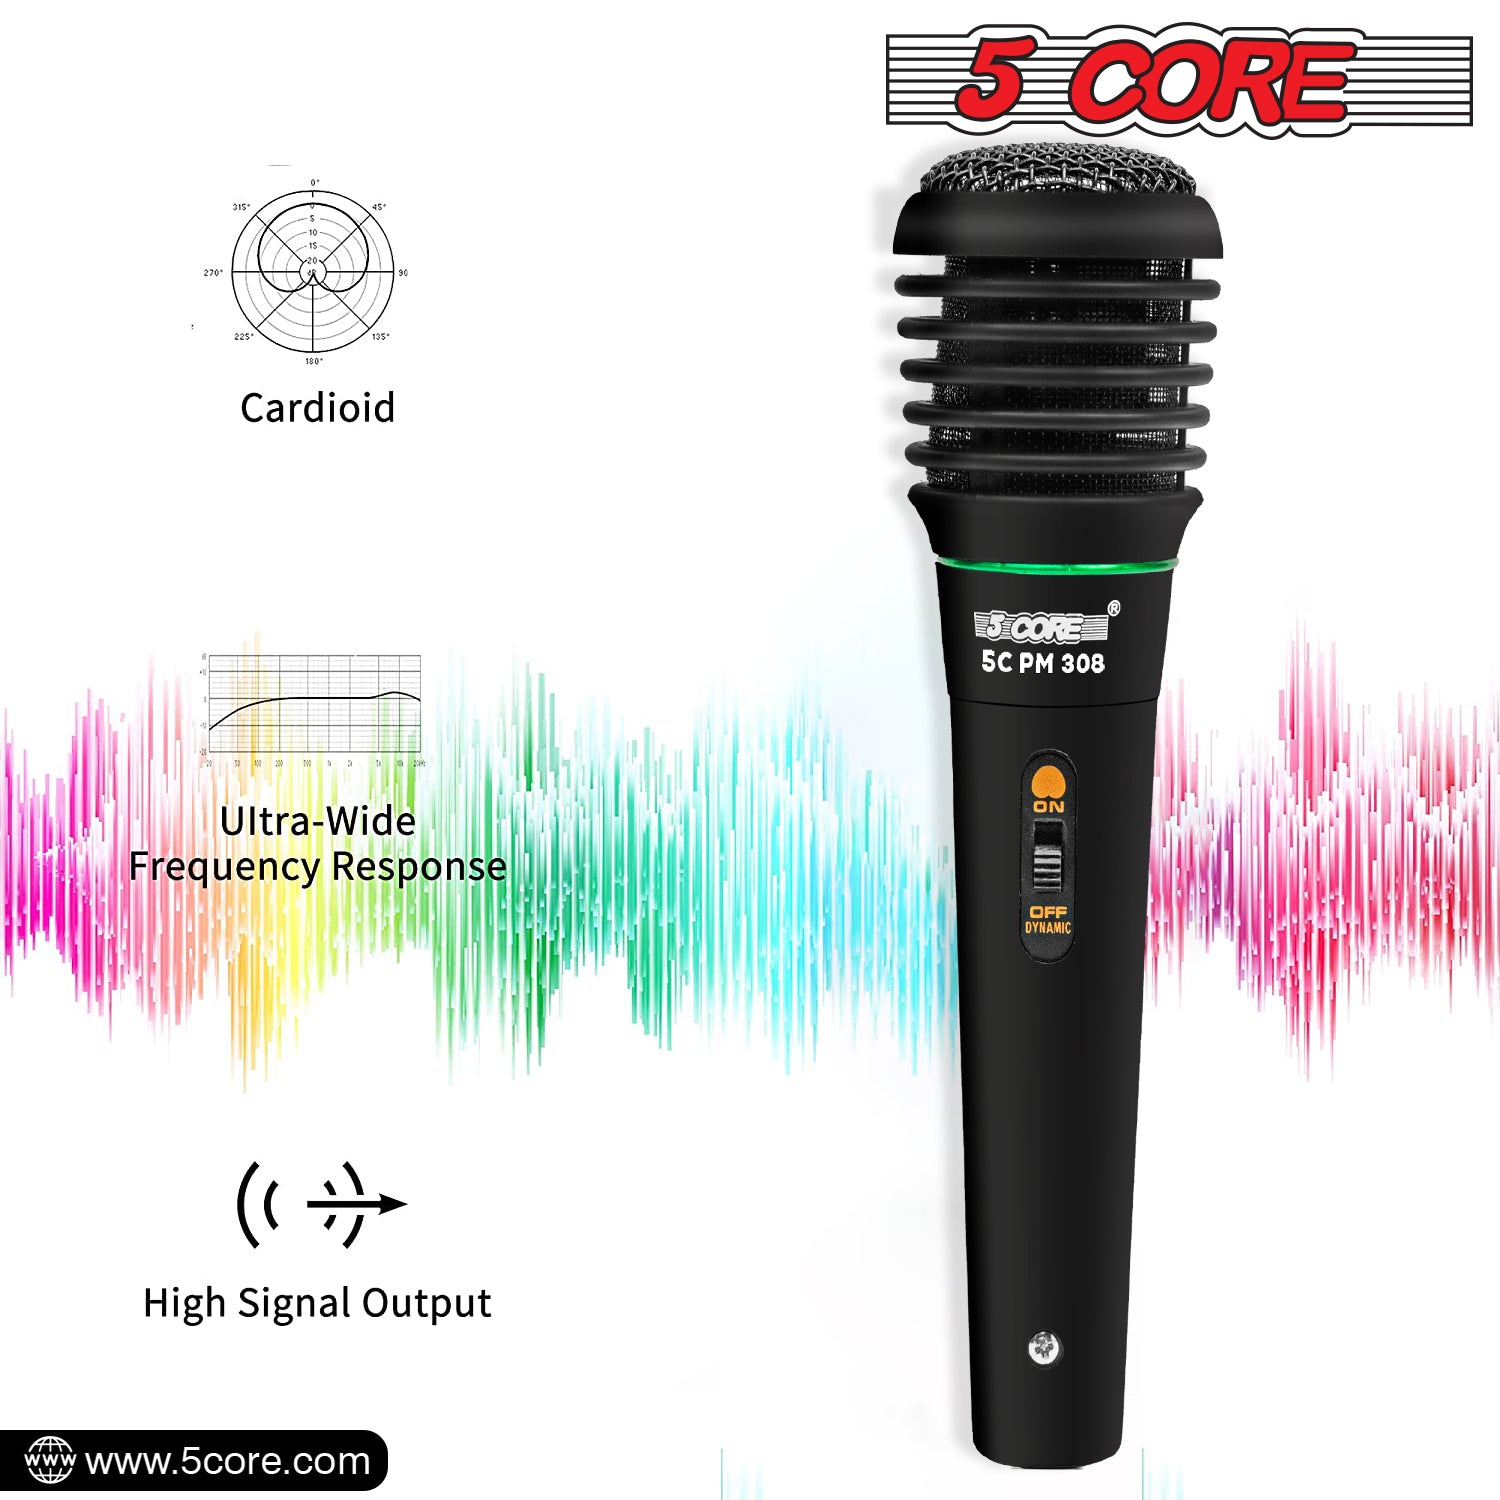 Professional dynamic microphone